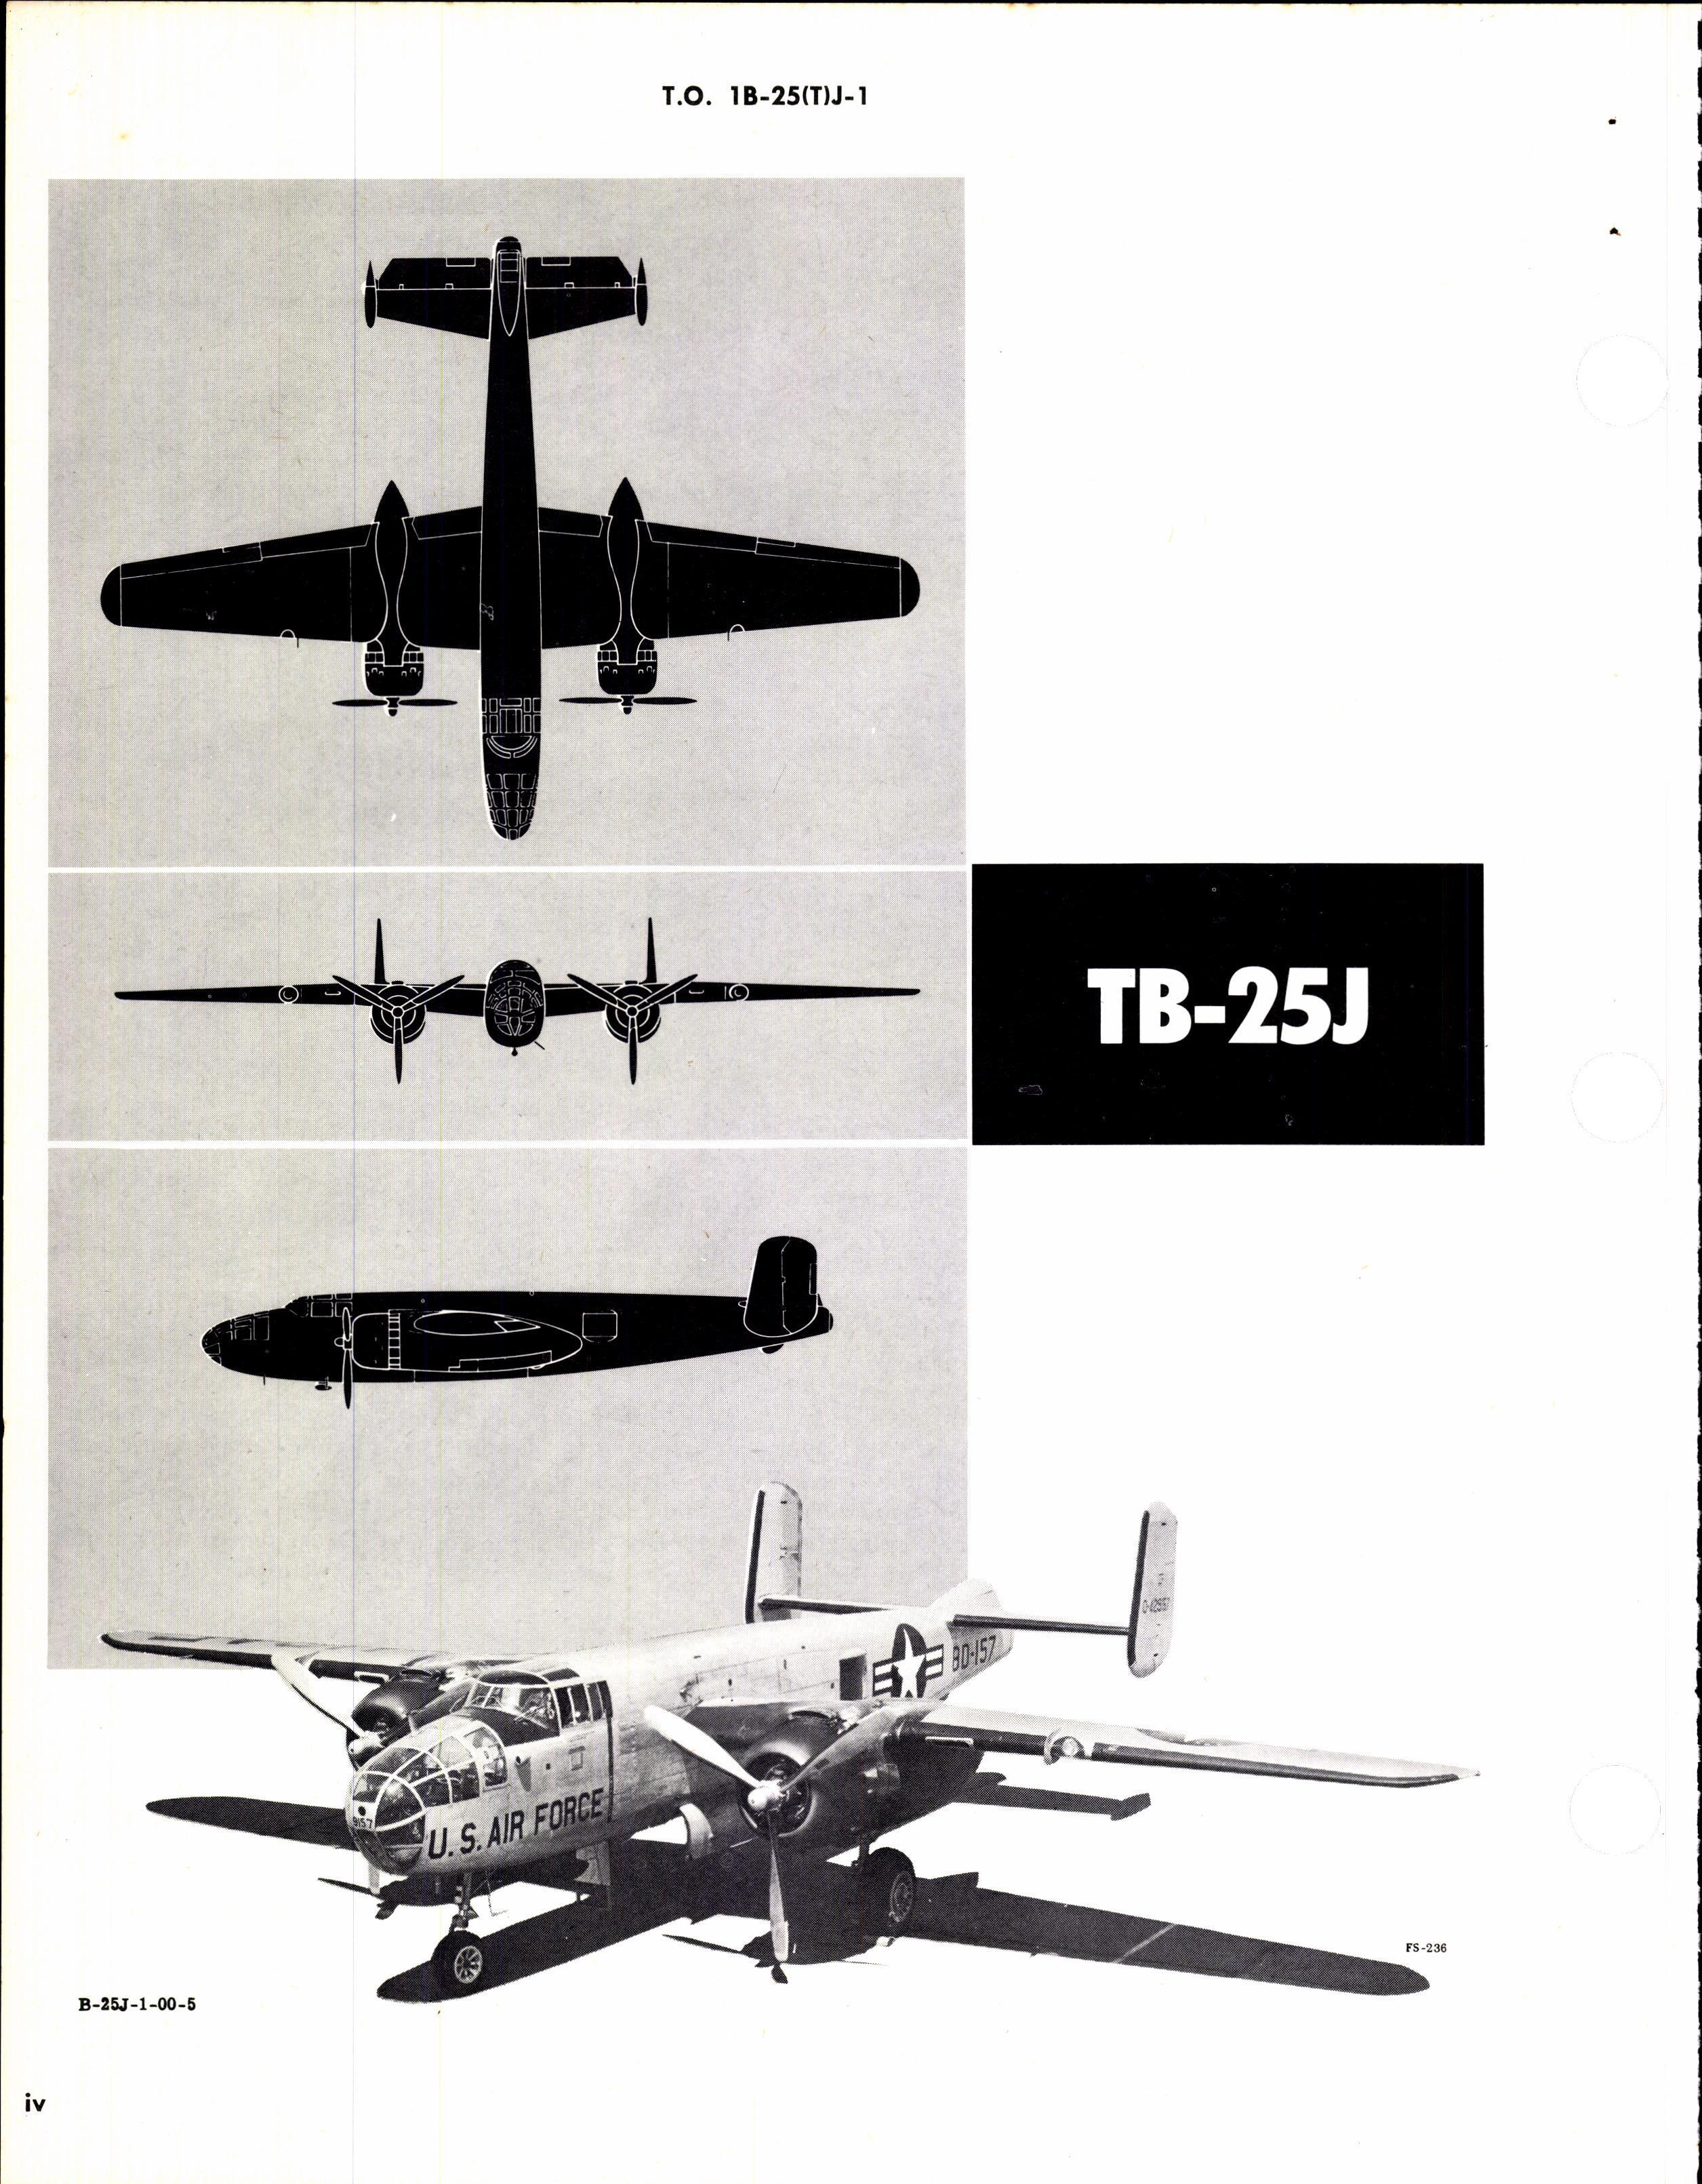 Sample page 6 from AirCorps Library document: Flight Handbook for TB-25J Aircraft